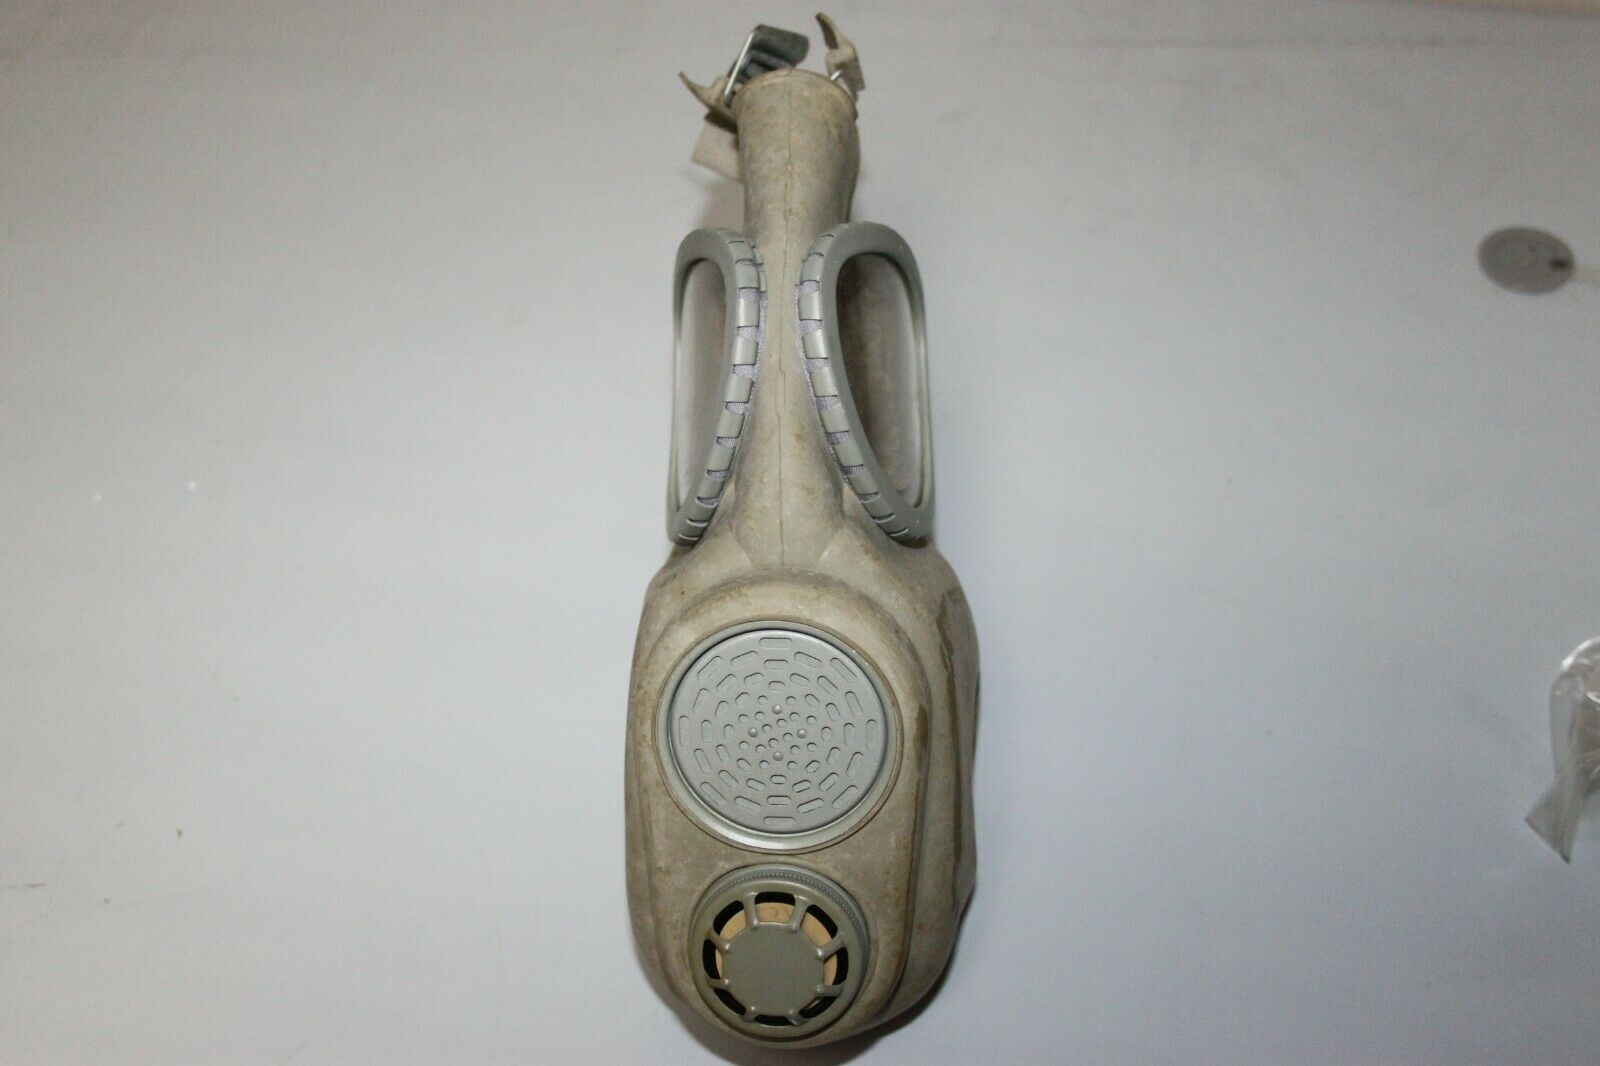 FADED/DISCOLORED/DIRTY CZECH M10 GAS MASK LOTE19